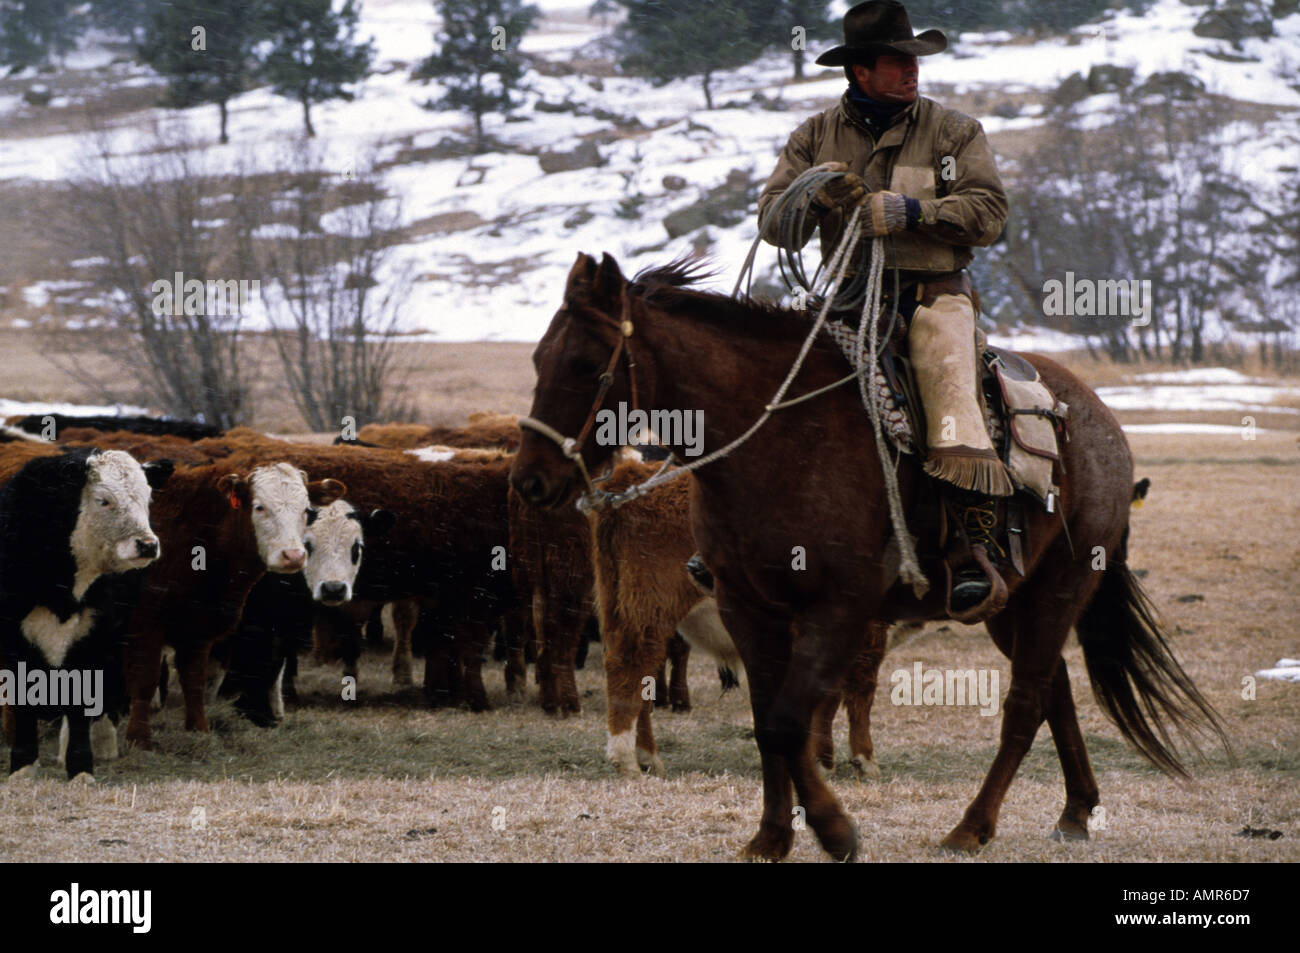 Cowboy rides his horse near cattle during winter  Stock Photo